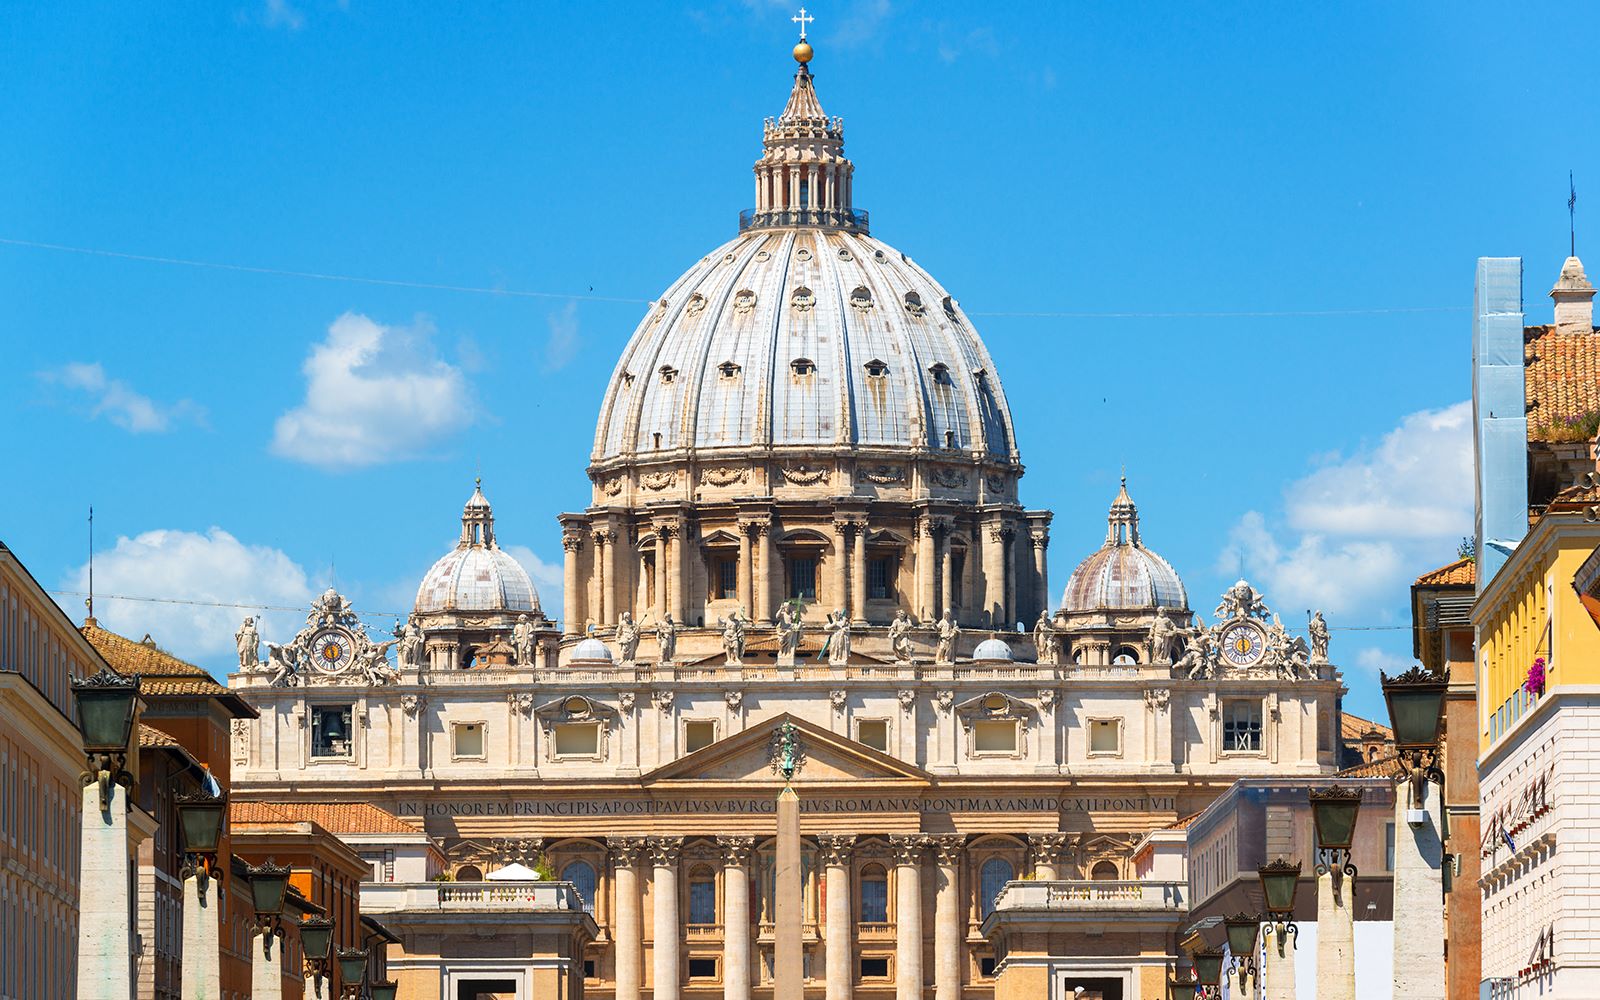 How Long Did It Take To Build St. Peter's Basilica In Rome